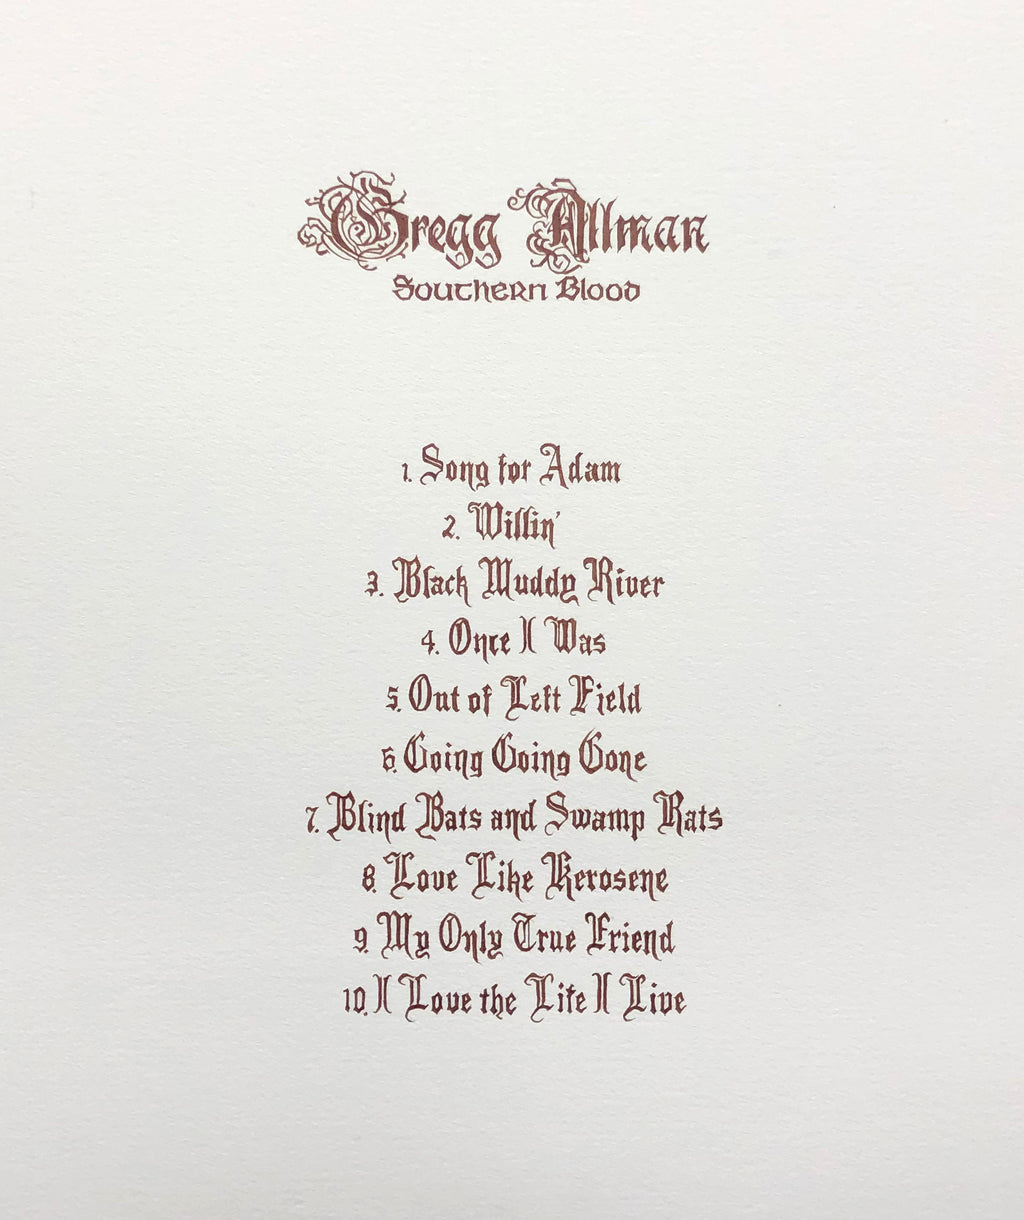 Southern Blood Track Listing